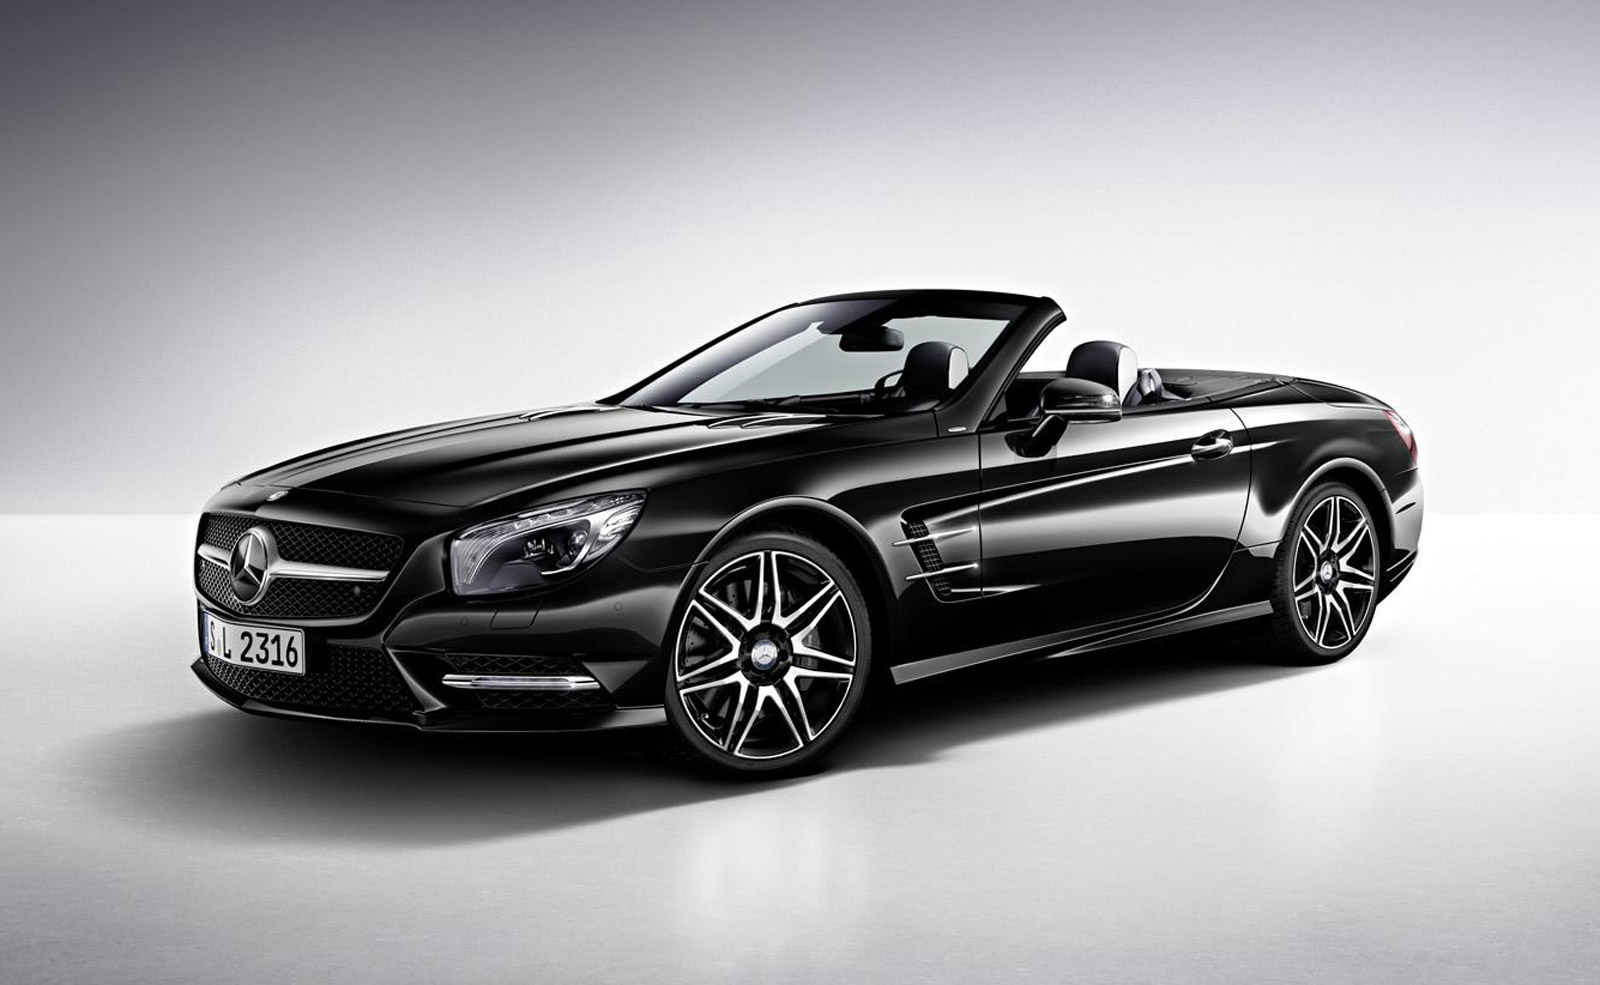 2015 Mercedes SL-Class Sees Price Drop With New V-6 Variant